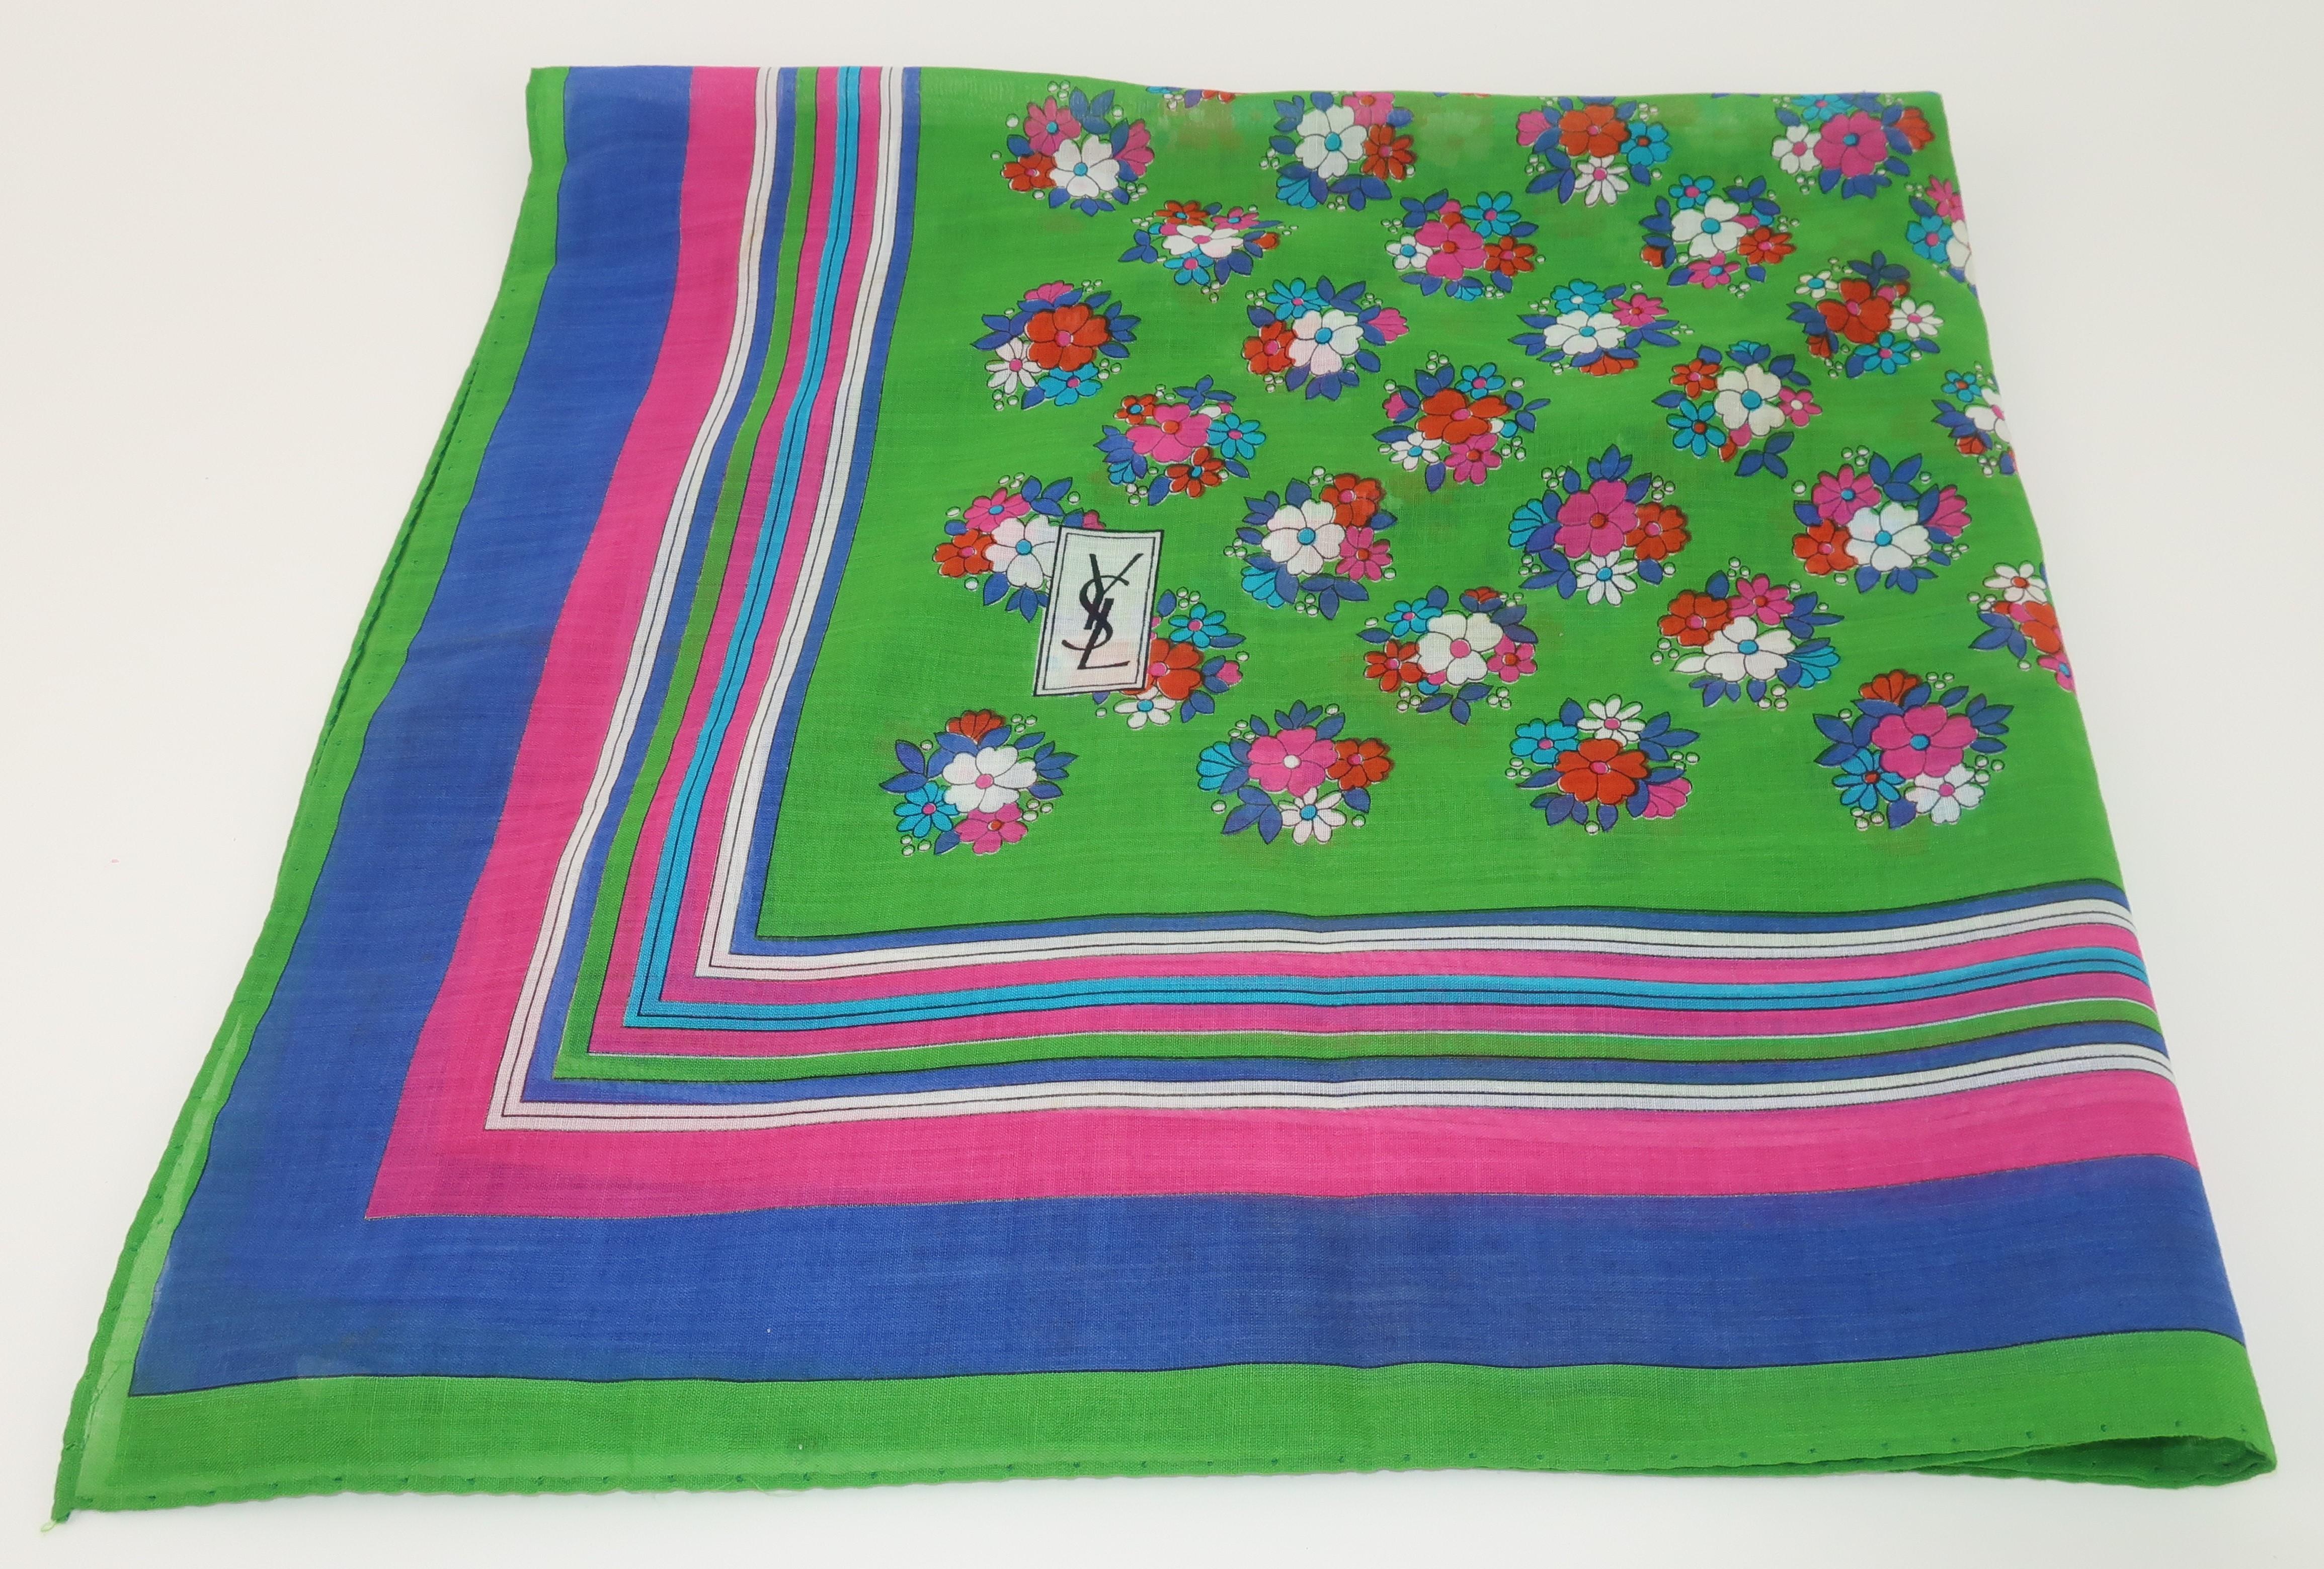 1970's Yves Saint Laurent fine cotton scarf with a floral bouquet print in shades of green, royal blue, hot pink, aqua blue, white and orangey-red.  The YSL logo is incorporated into the design and a 'Made in Italy' contents label attached to a